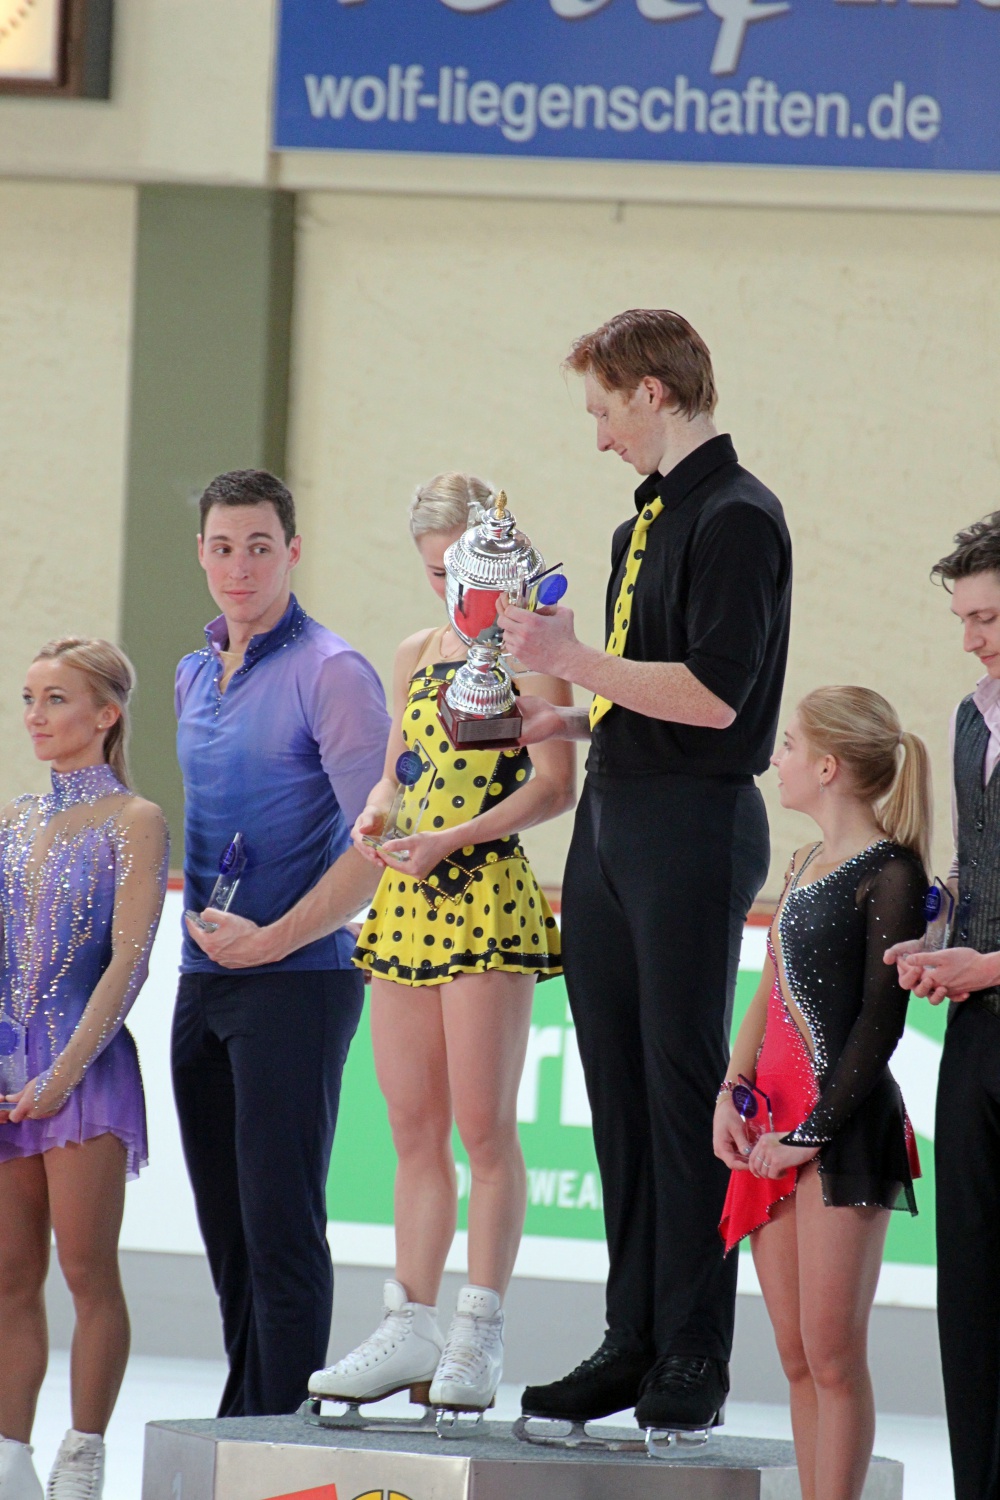 The podium - Massot looks like he really wants this trophy